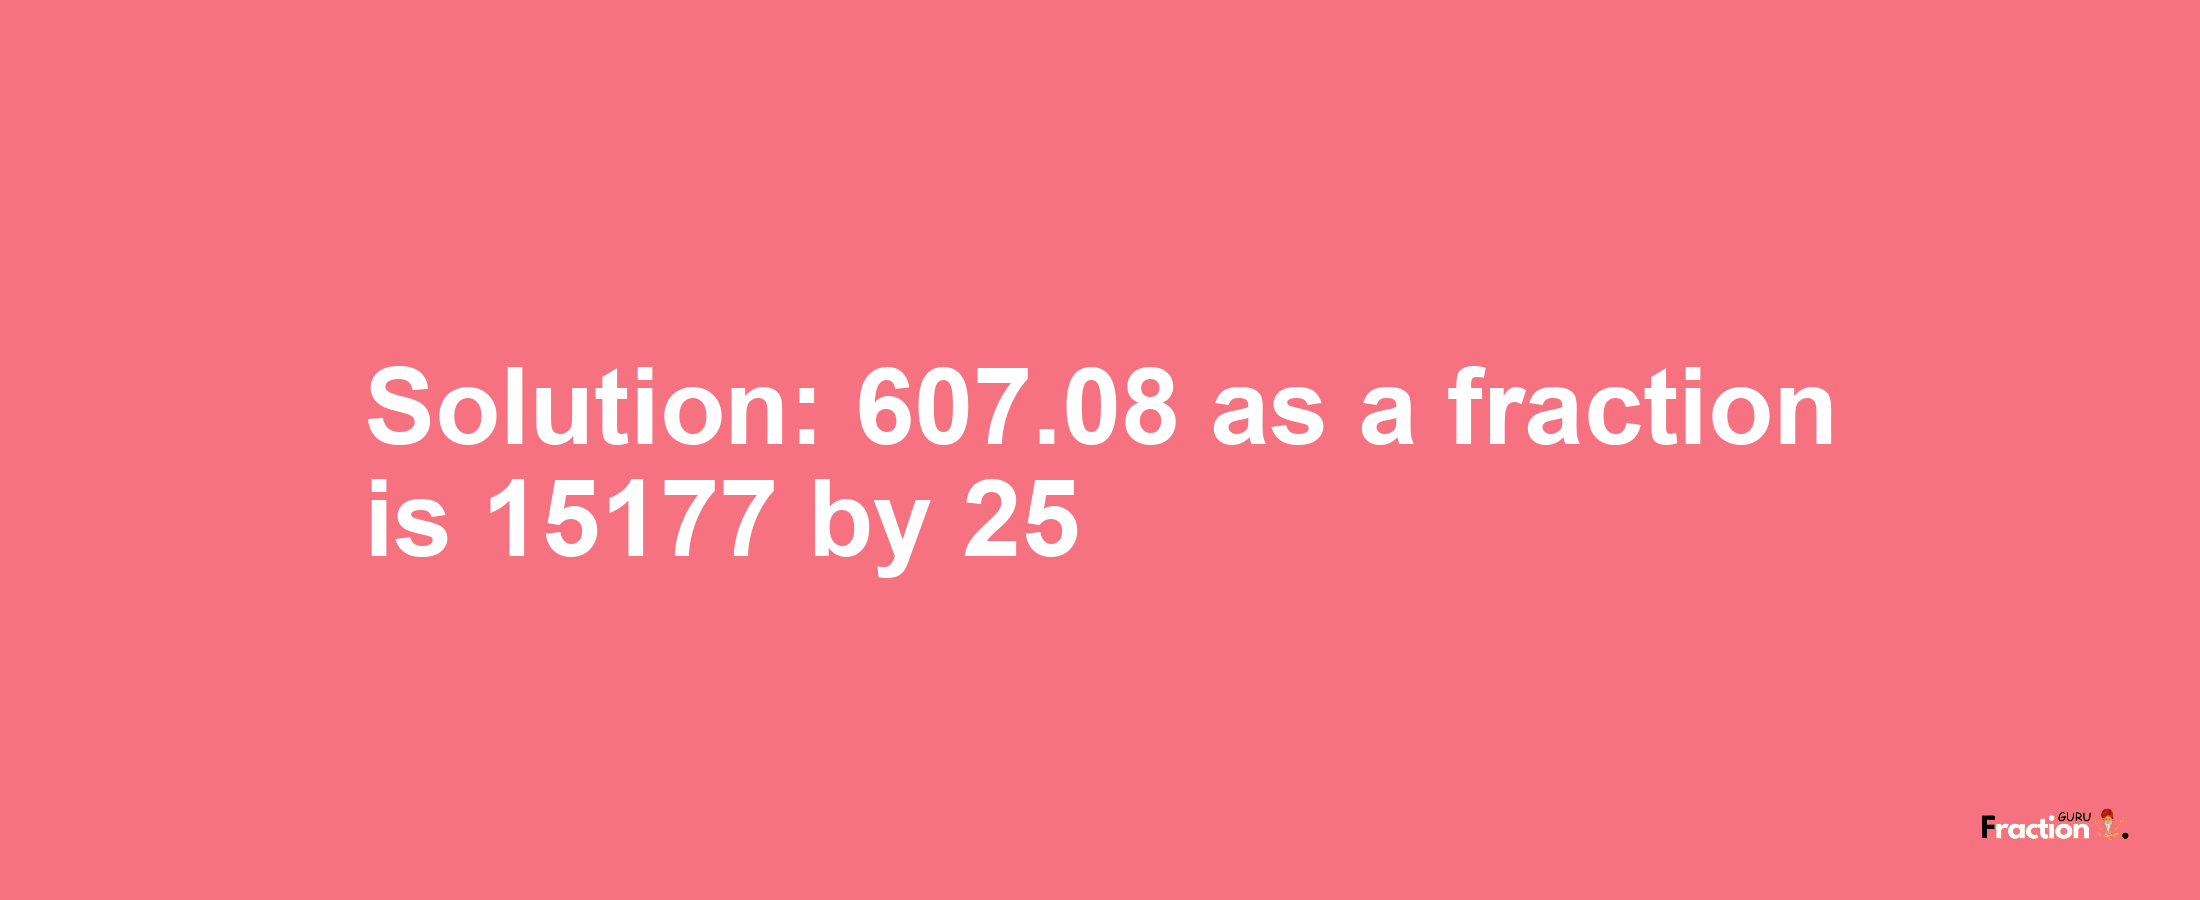 Solution:607.08 as a fraction is 15177/25